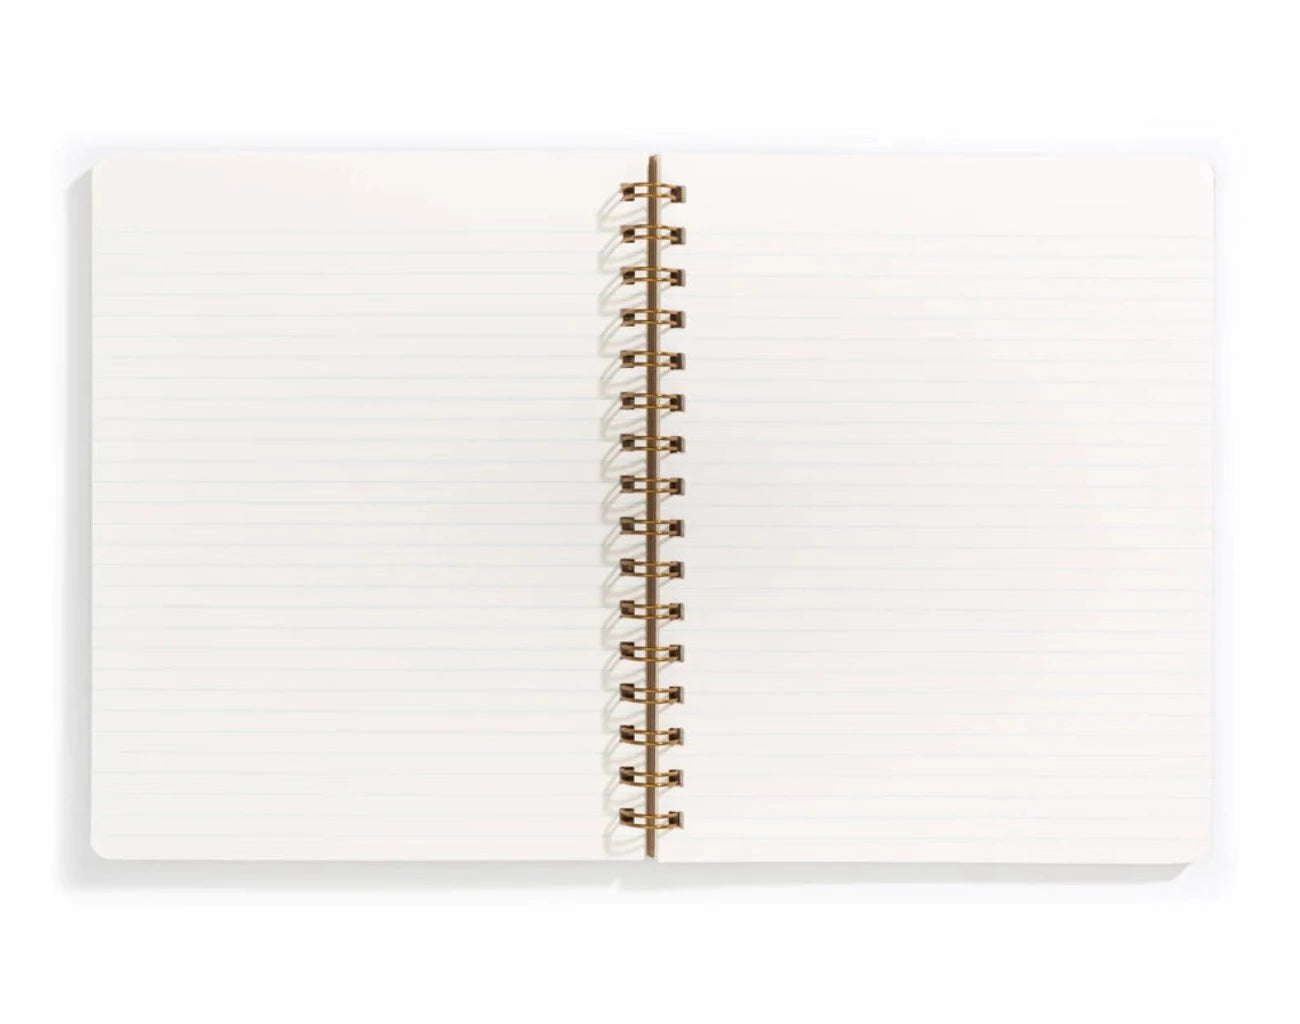 Left-handed notebook by Shorthand Press